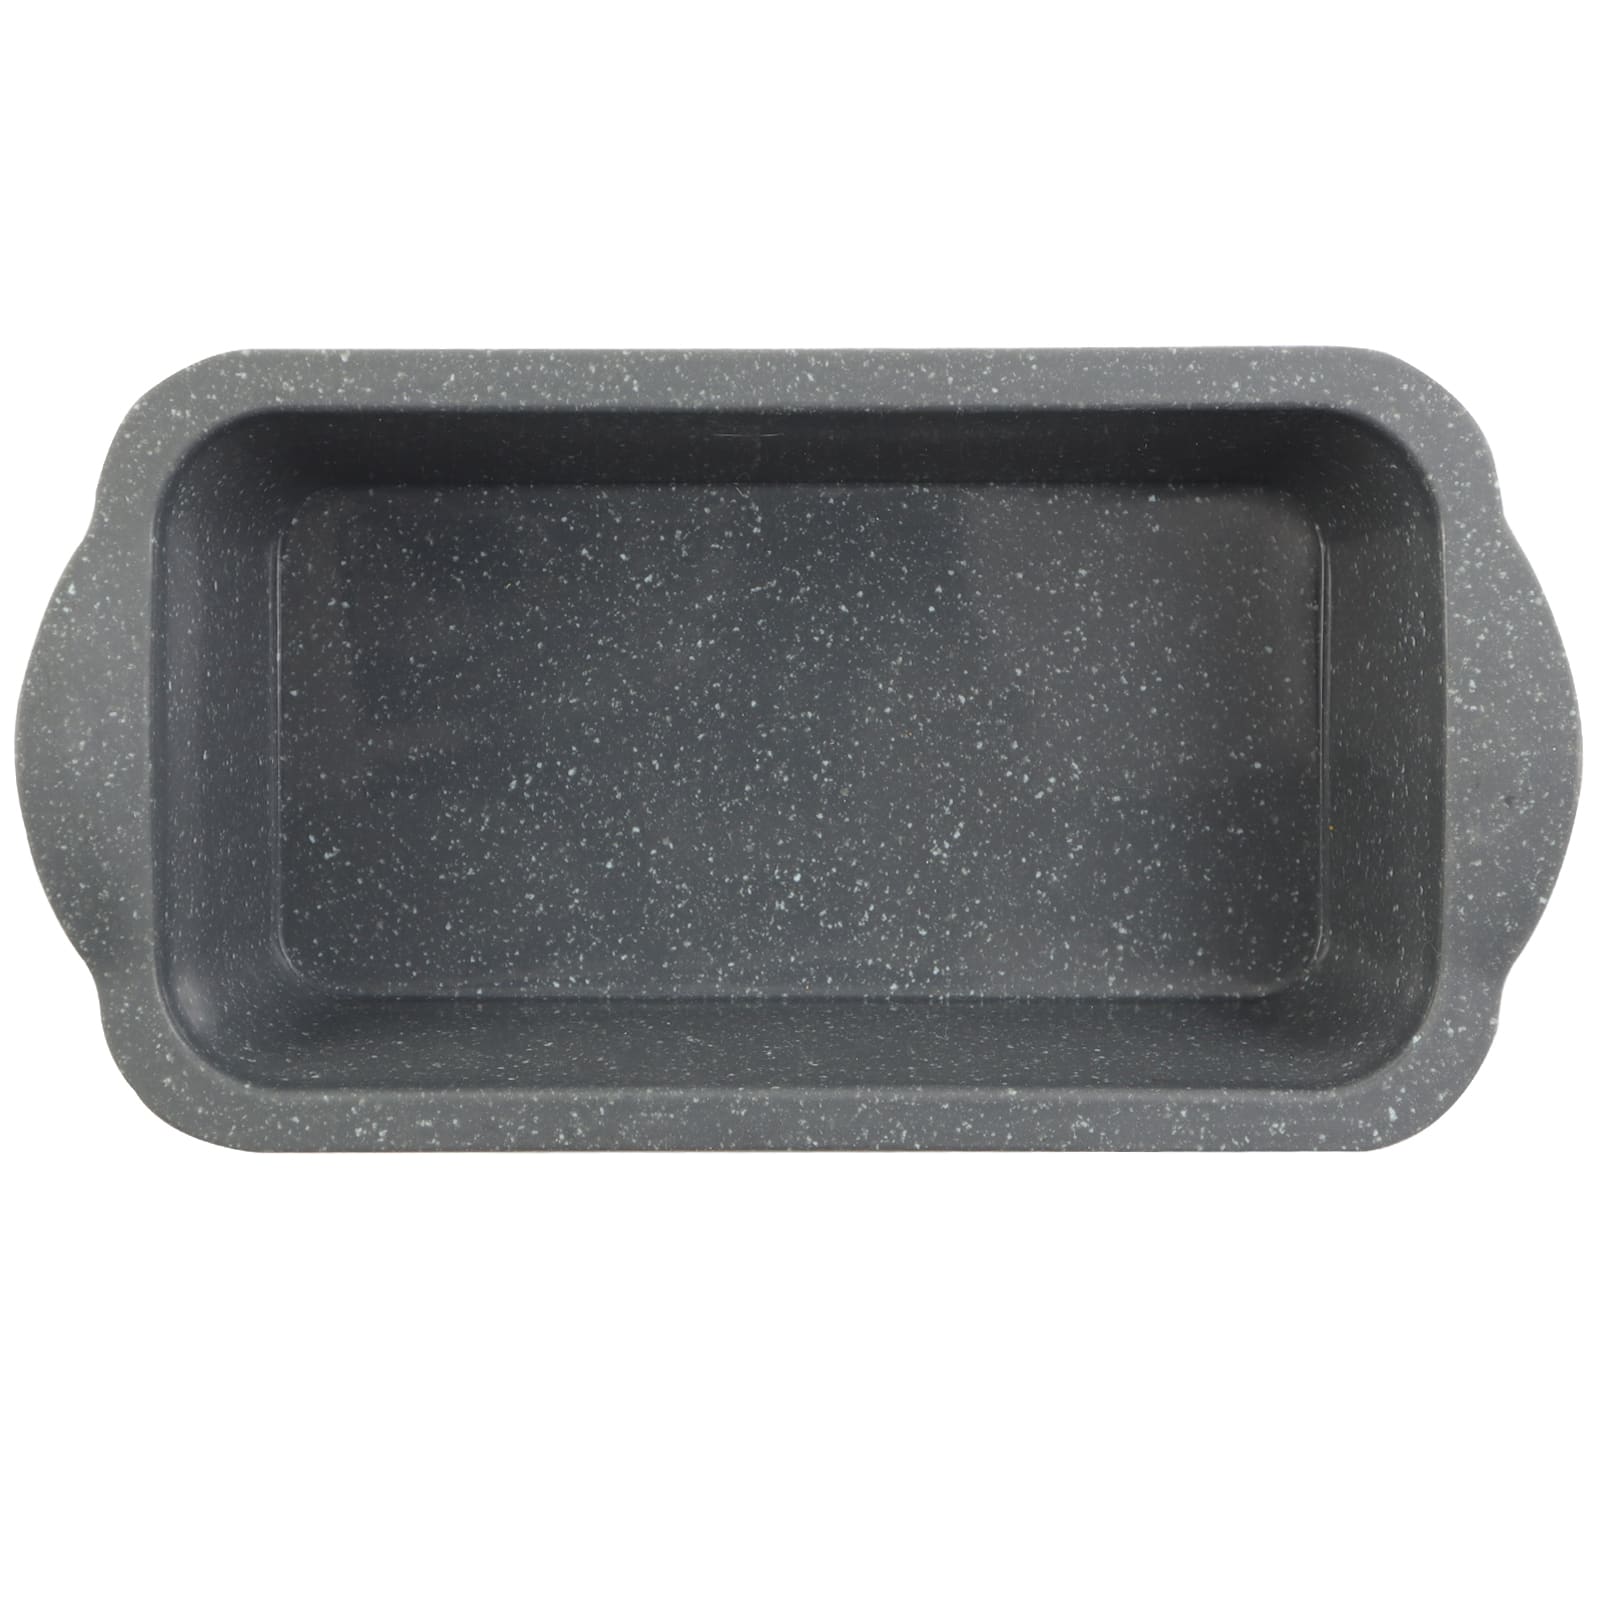 Let Your Style shine: SILICONE LOAF PAN DAILY BAKE